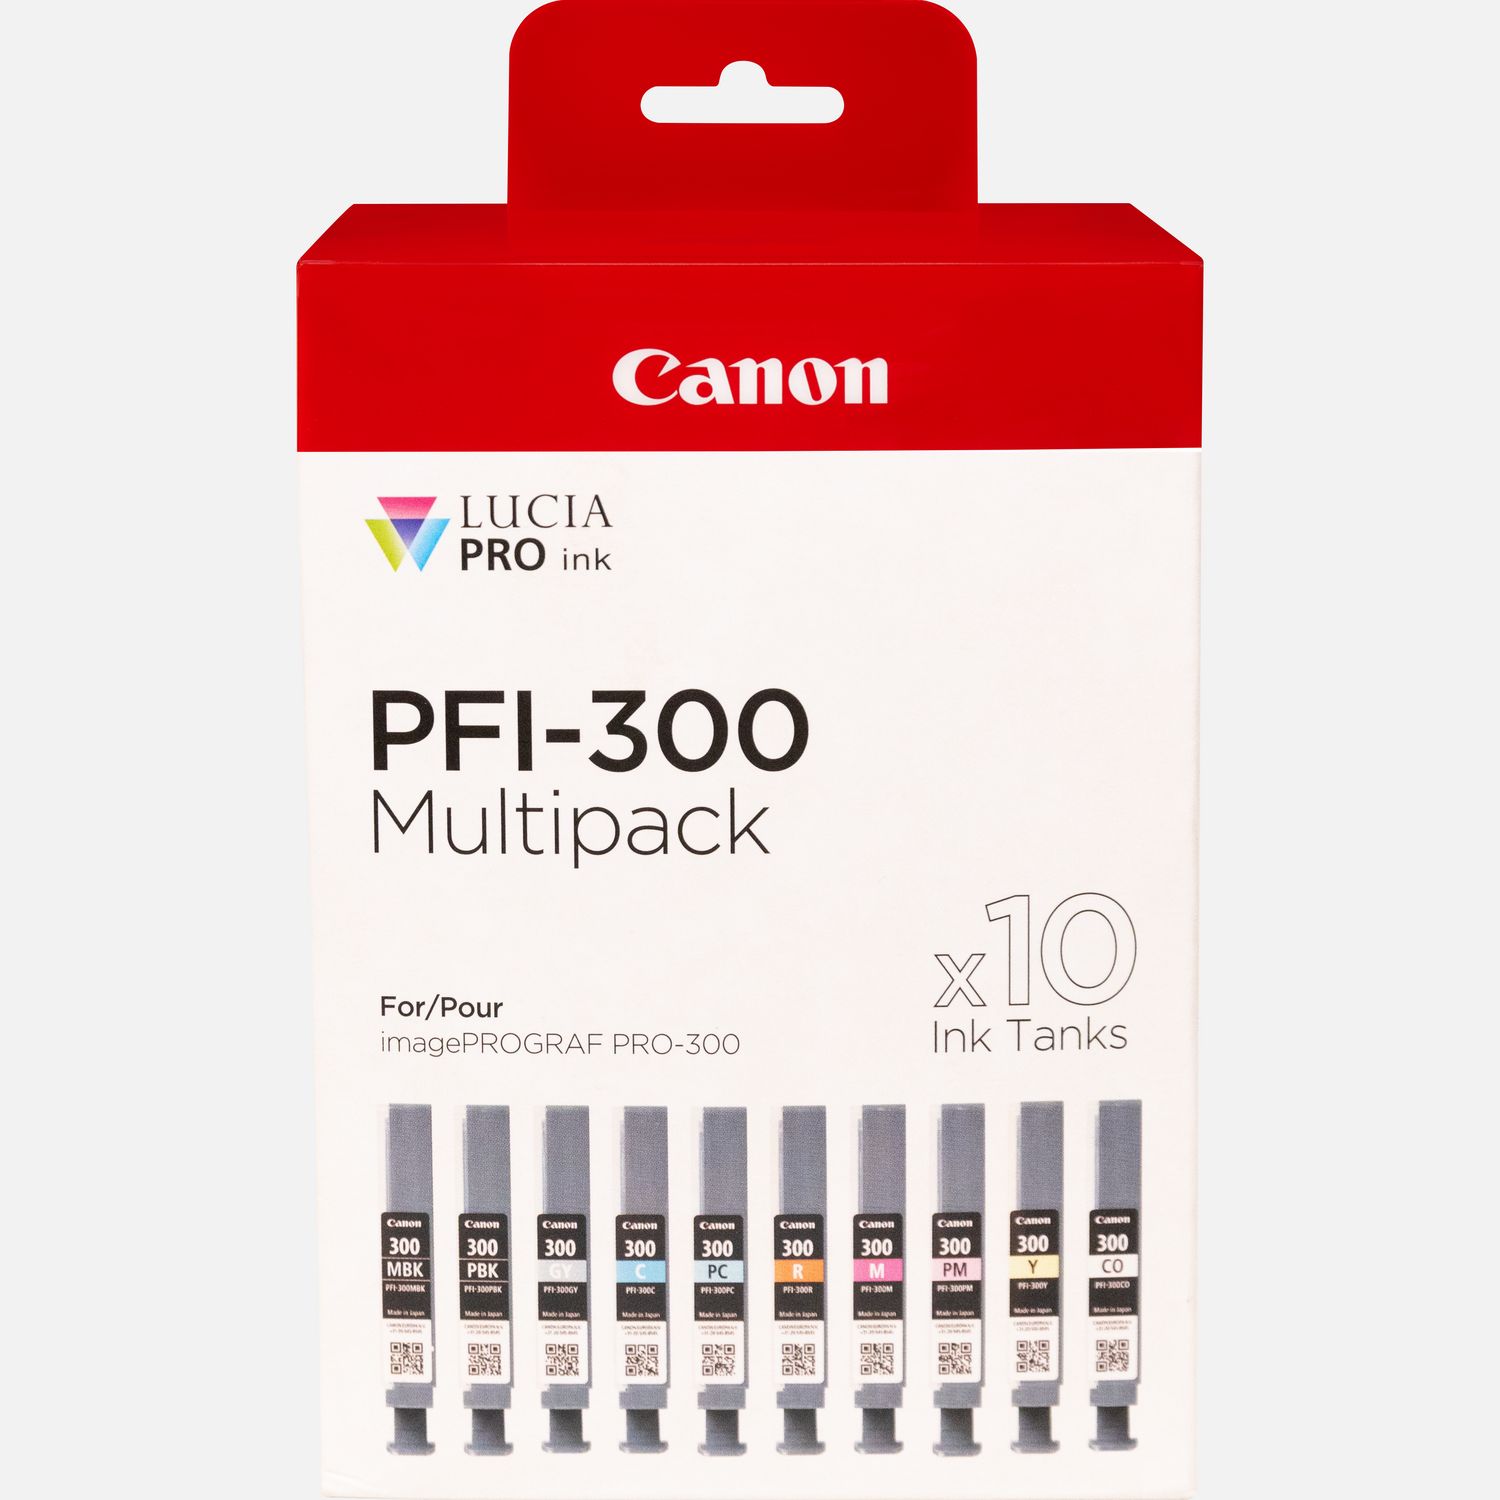 Image of 10 cartucce Inkjet Multipack Canon PFI-300 MBK/PBK/CO/GY/R/C/M/Y/PC/PM